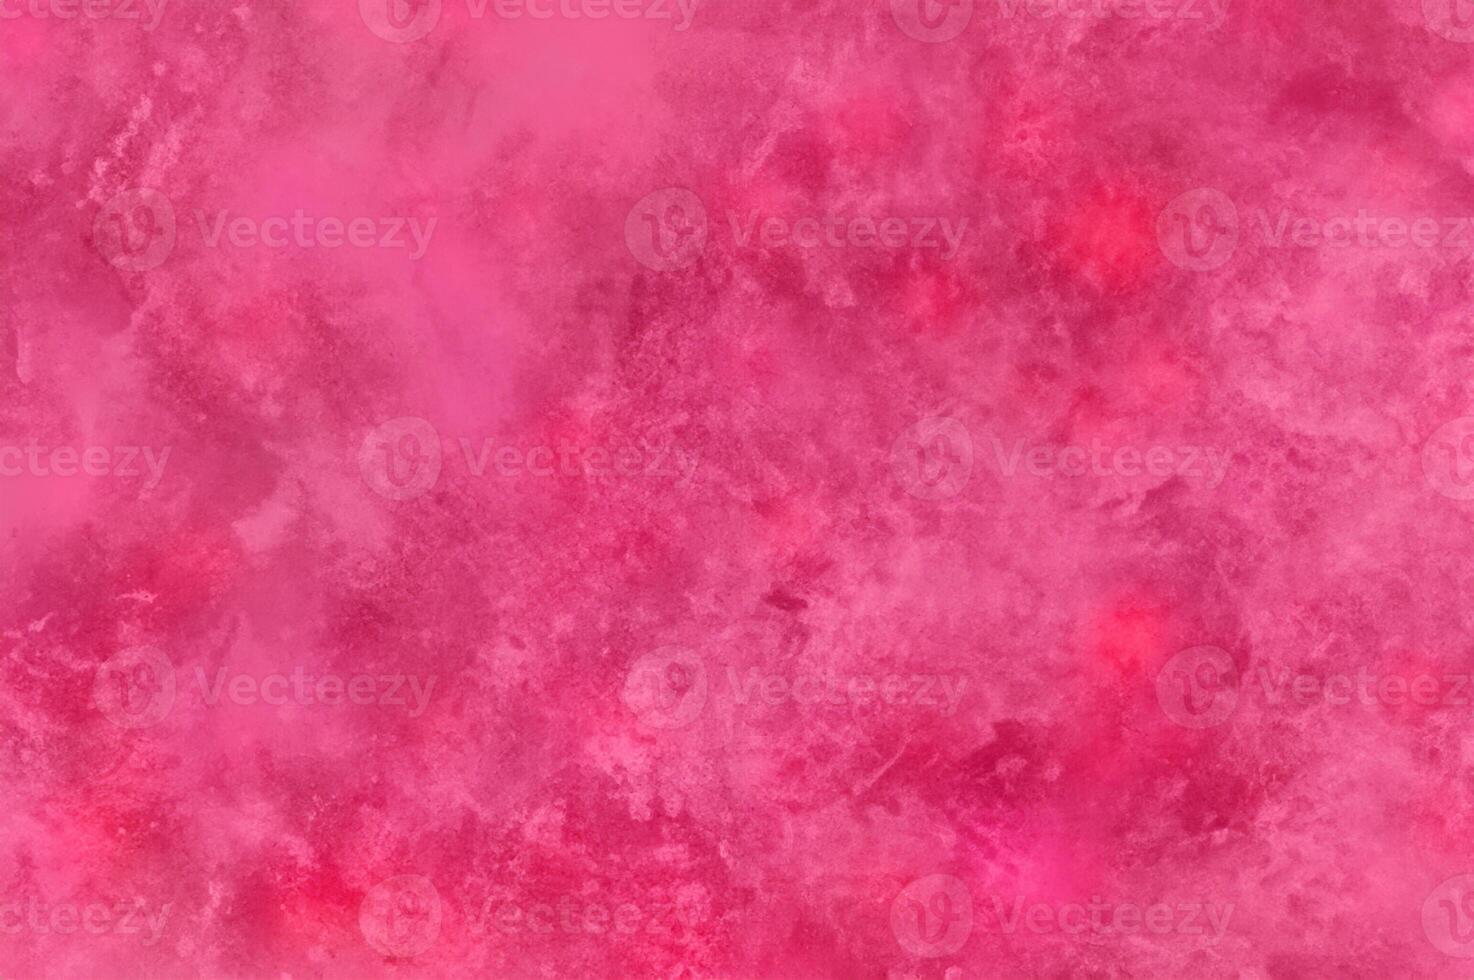 Bright pink grunge background wall texture imitation. Concept for Valentine's Day. photo